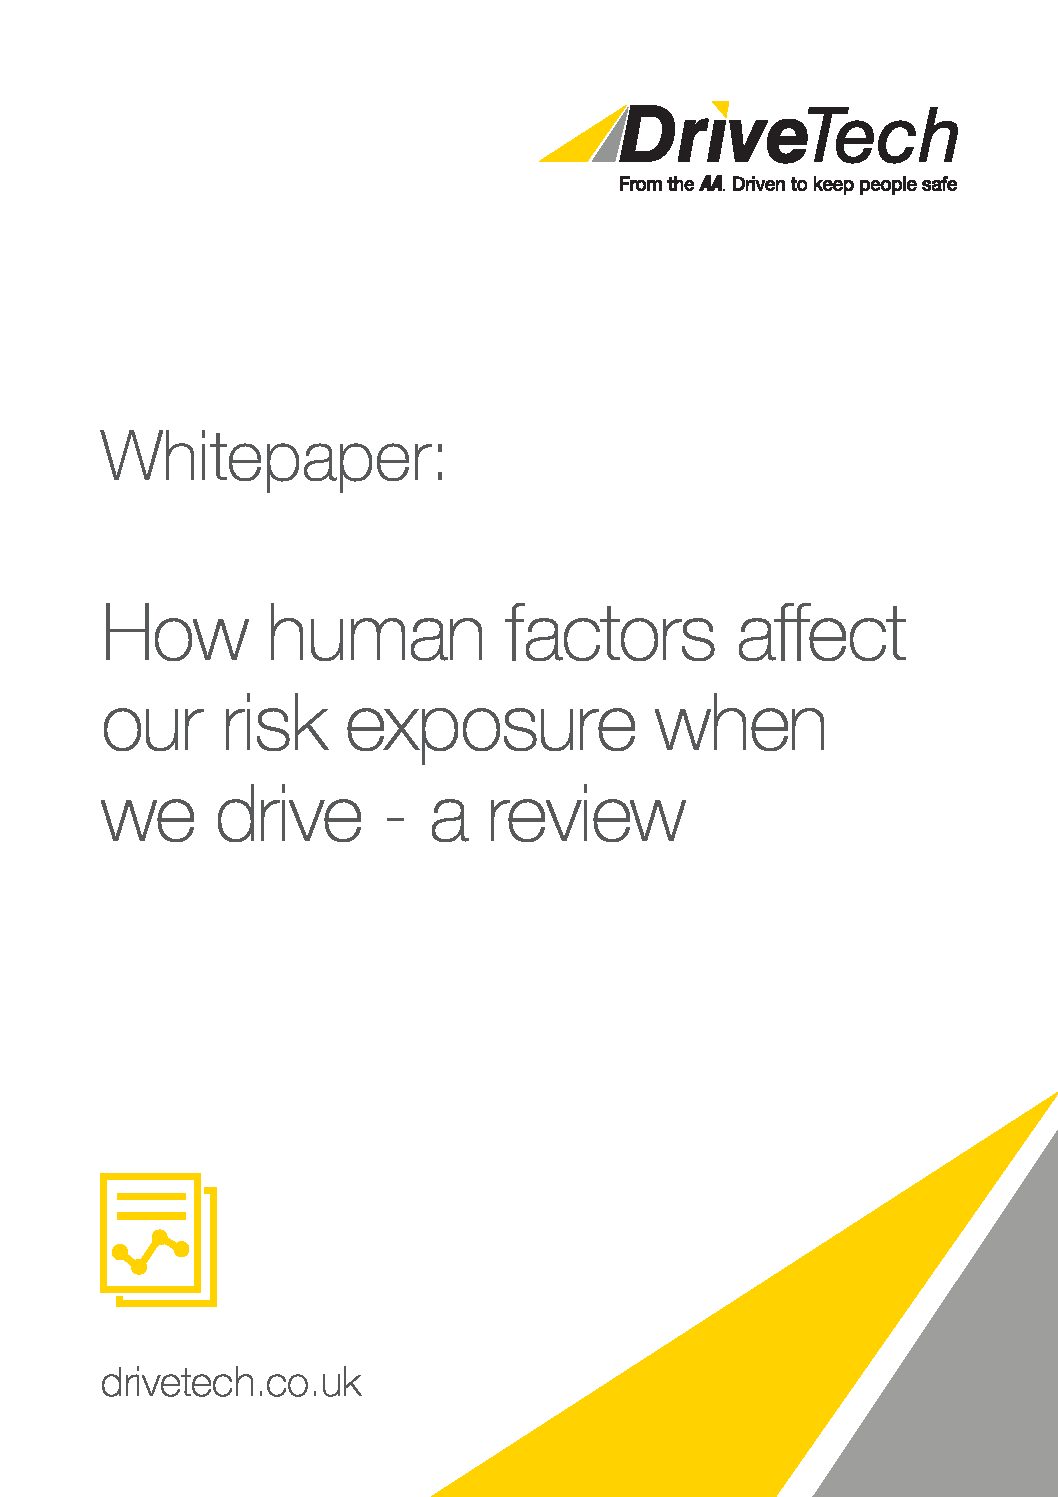 Whitepaper – How Human Factors Affect Risk Exposure When We Drive